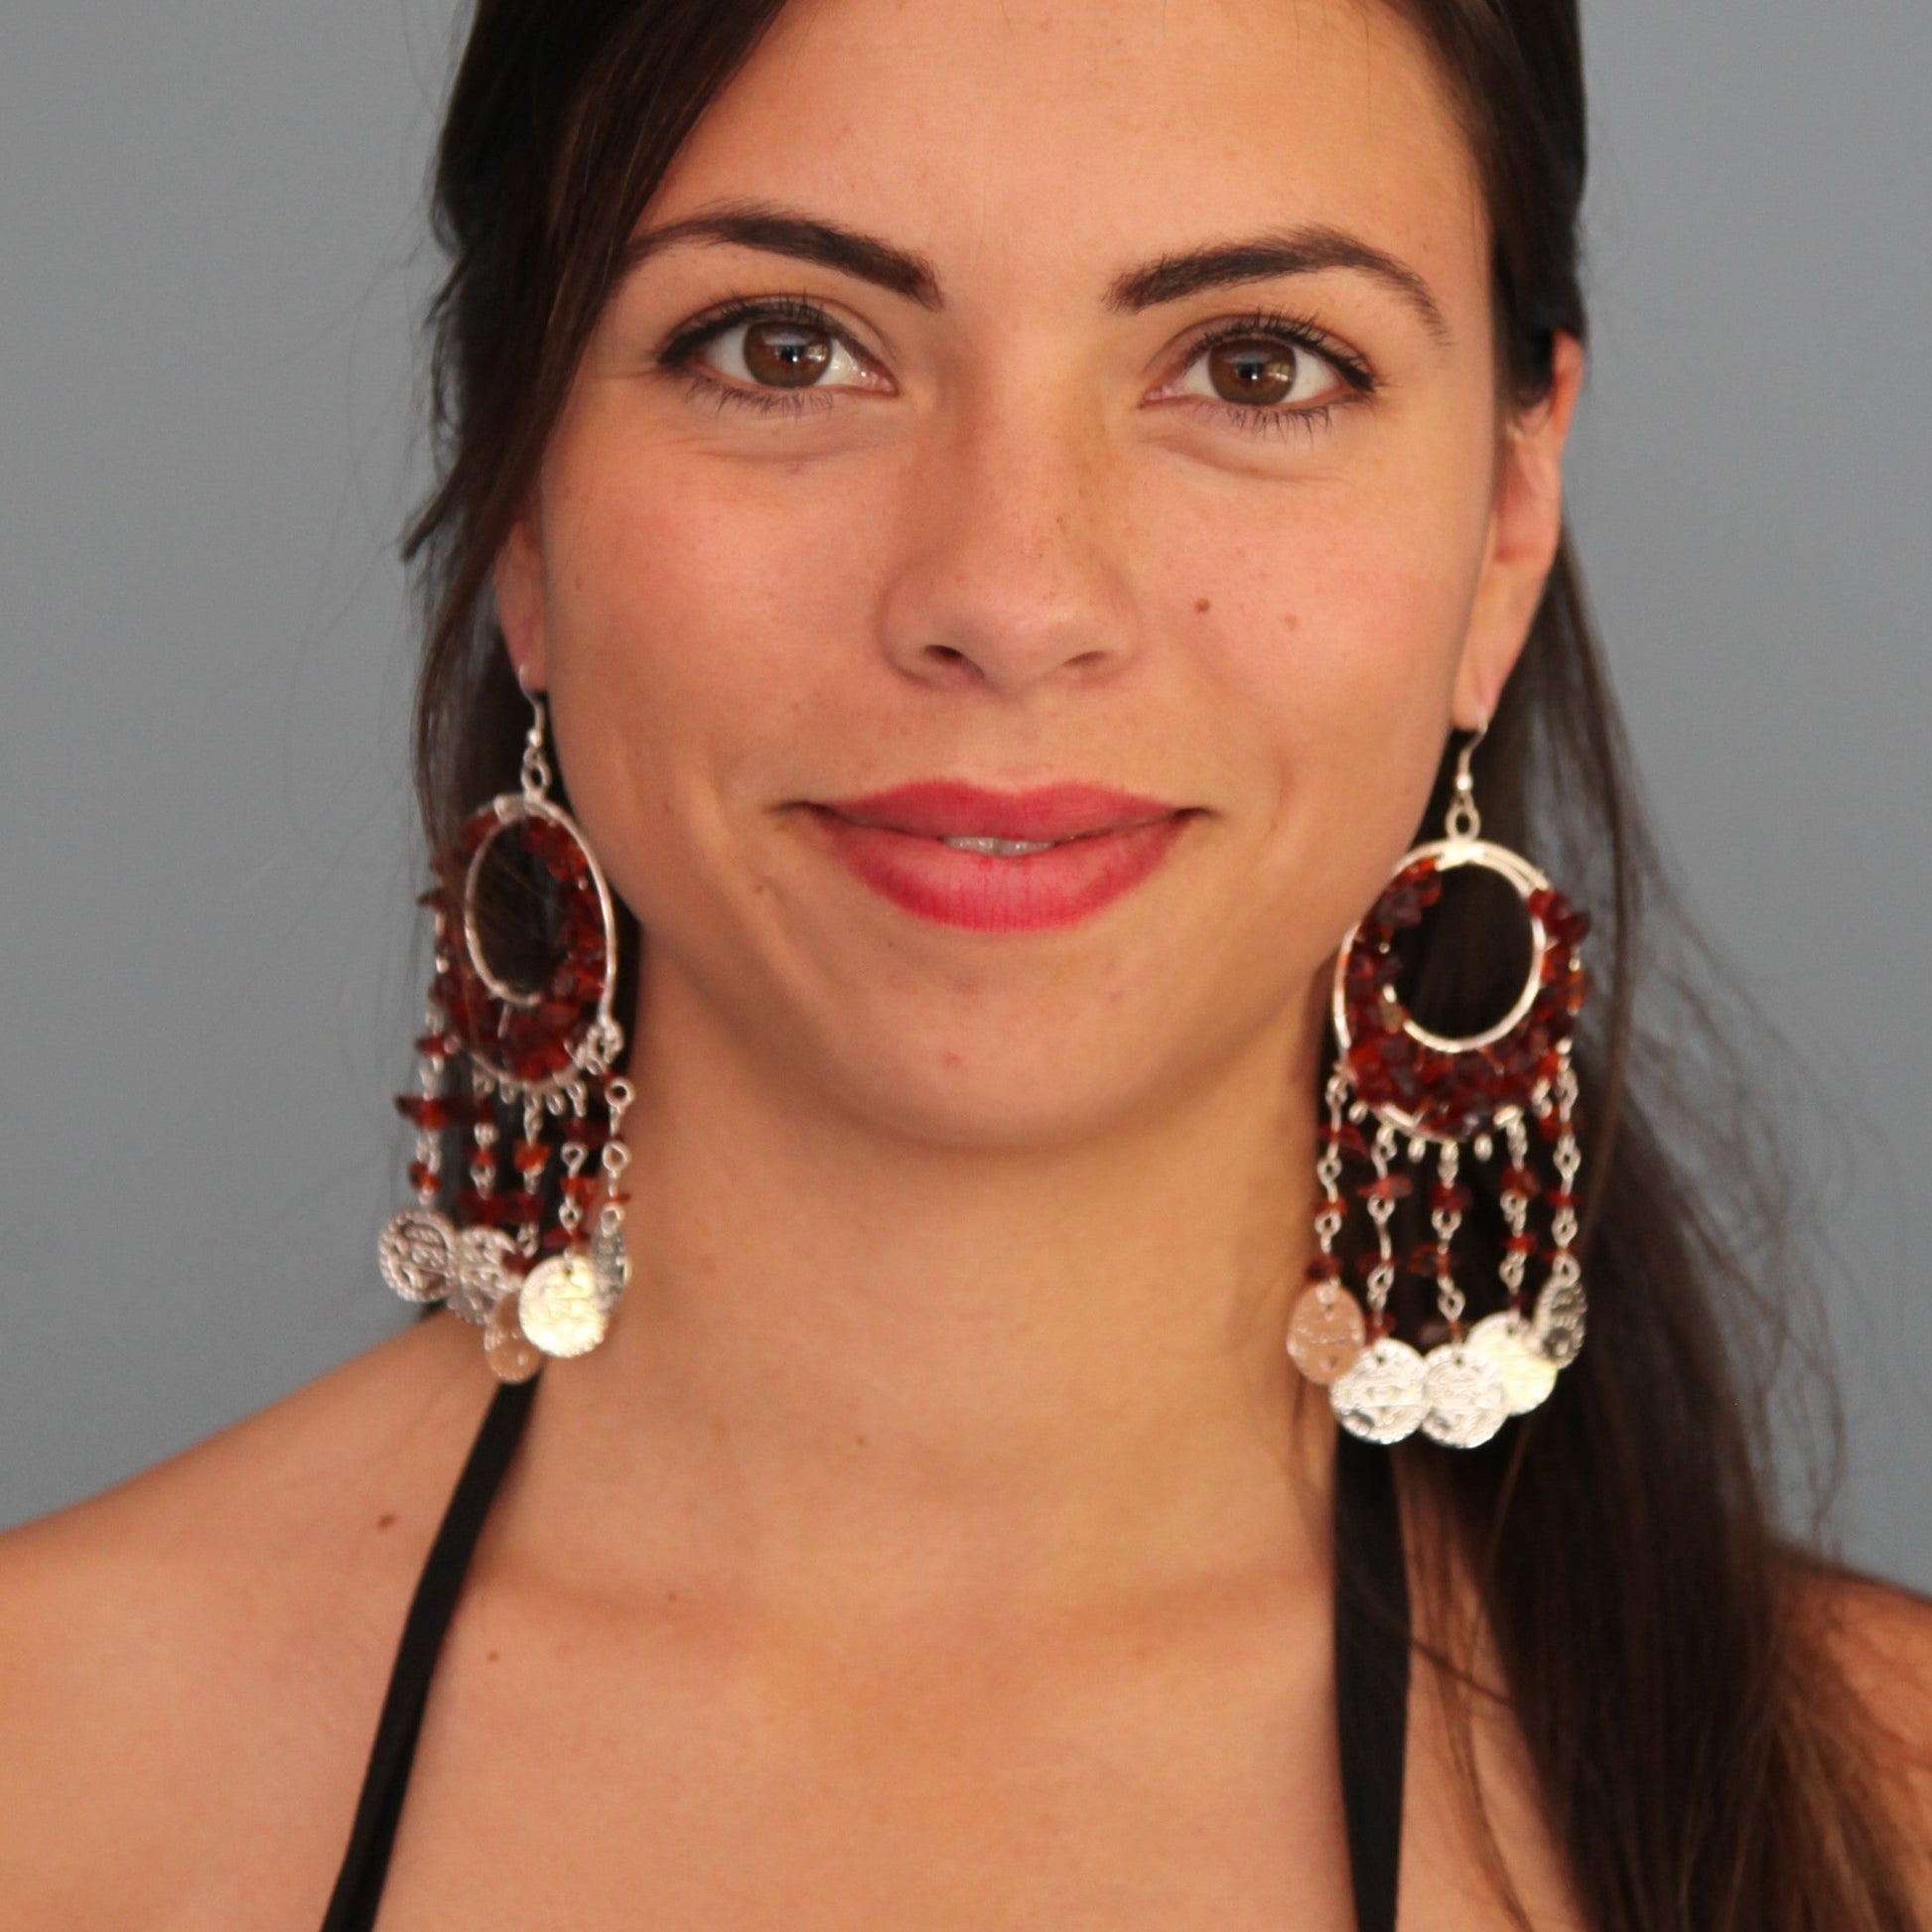 Stylish Double Hoop Metal Earrings with Rough-Cut Colored Beads & Dangling Coin Accents - Eclectic & Chic Design